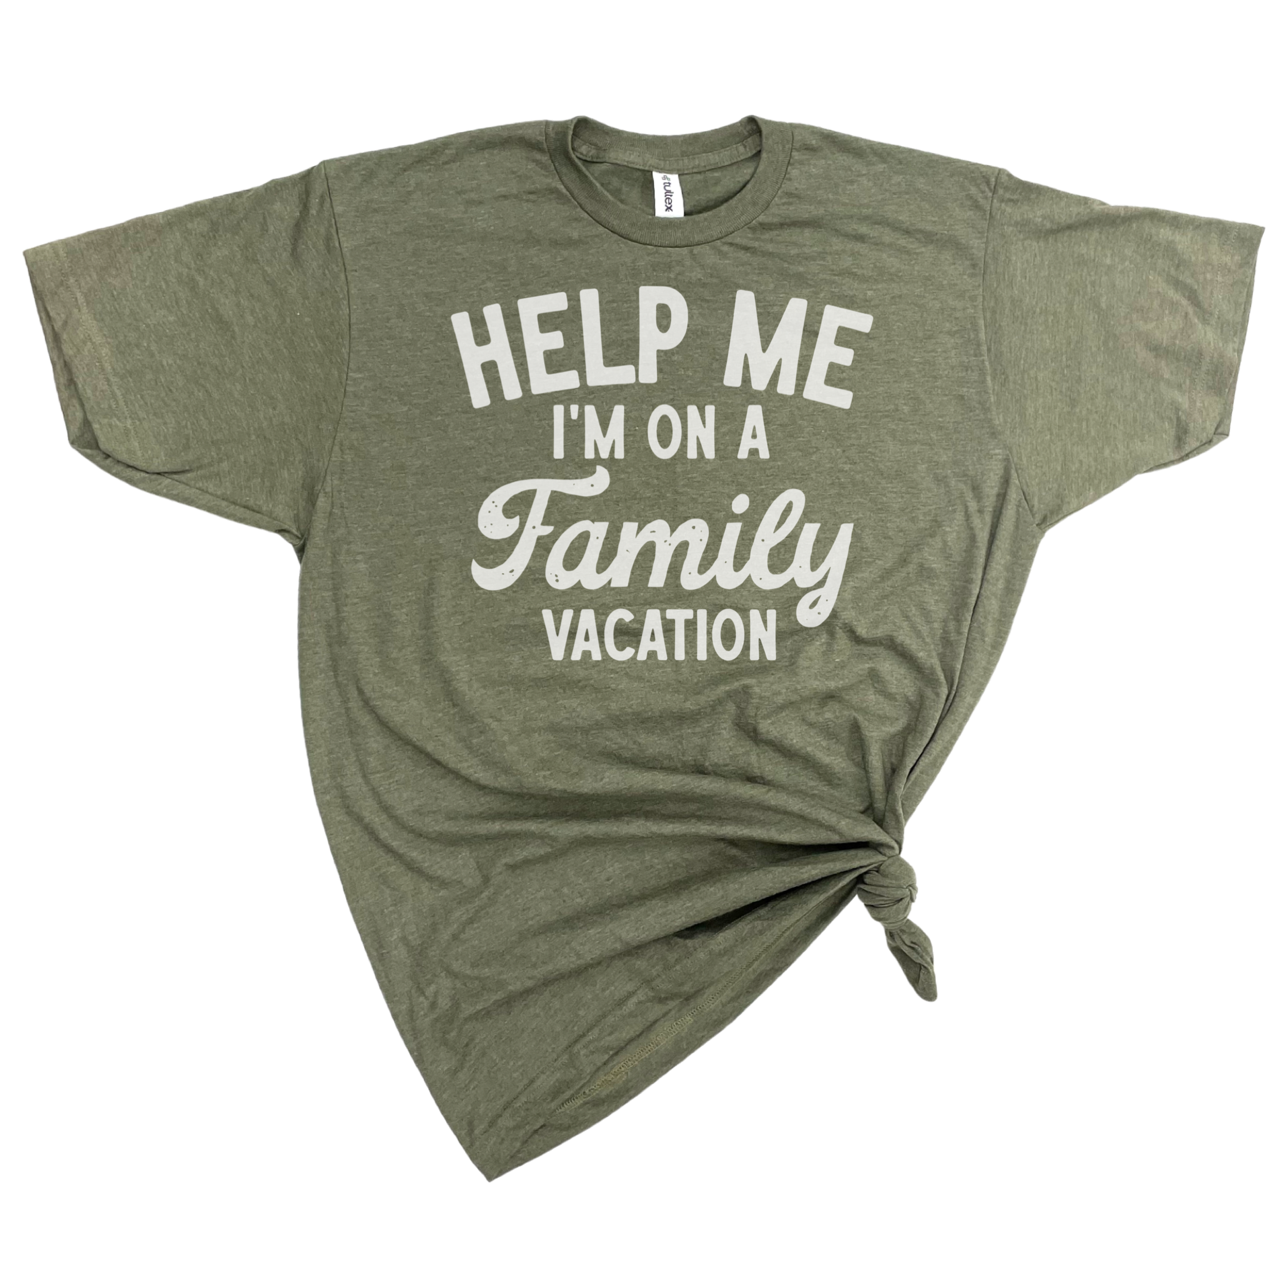 dkhandmade - Help Me I'm On A Family Vacation T-shirt